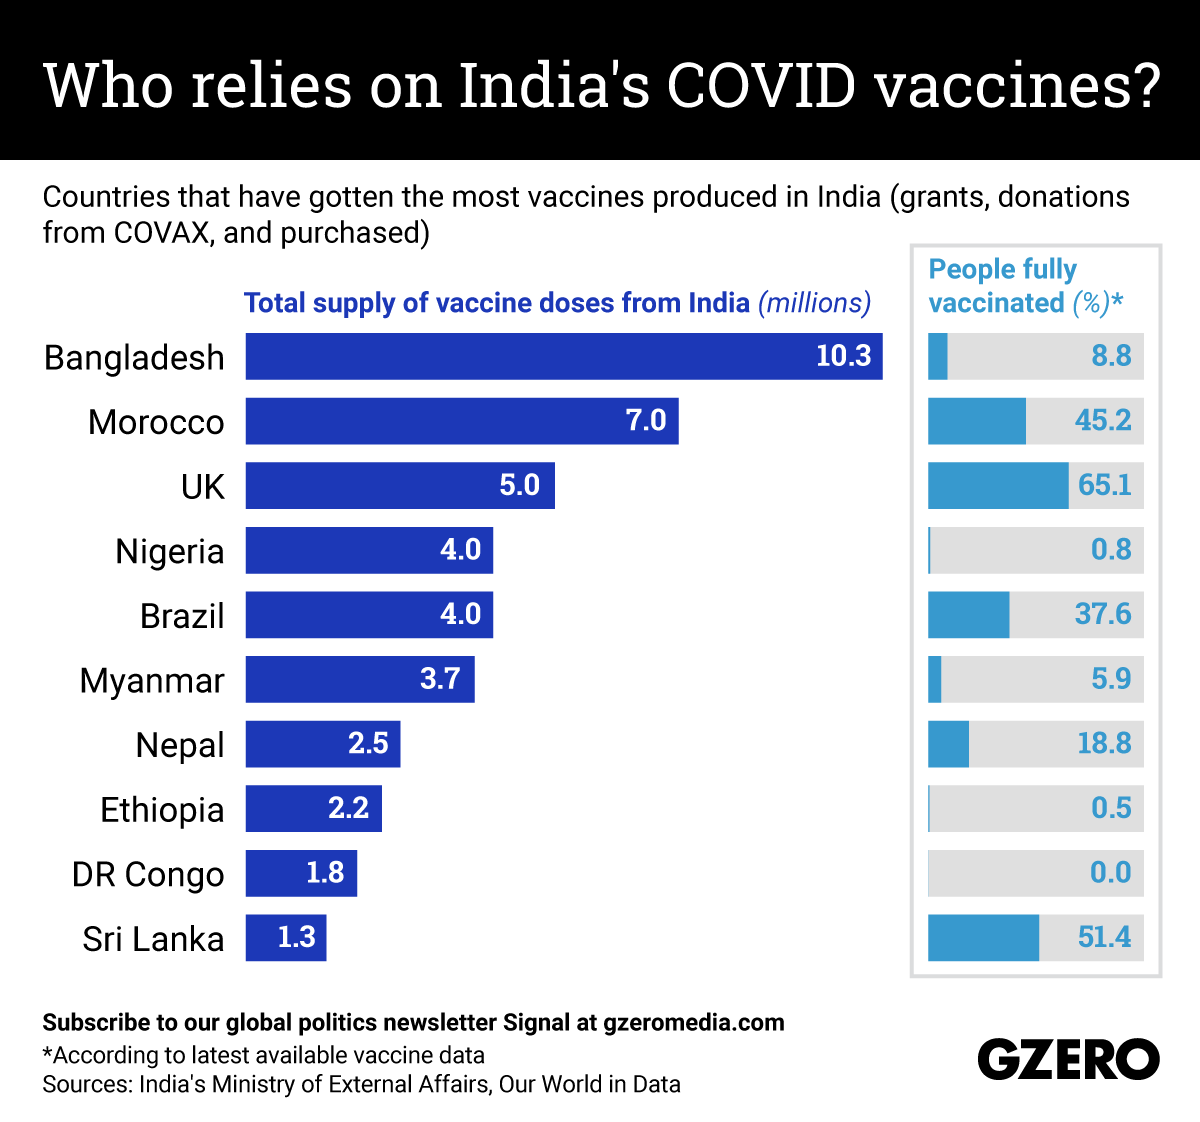 Countries that have gotten the most vaccines produced in India (grants, donations from COVAX, and purchased)